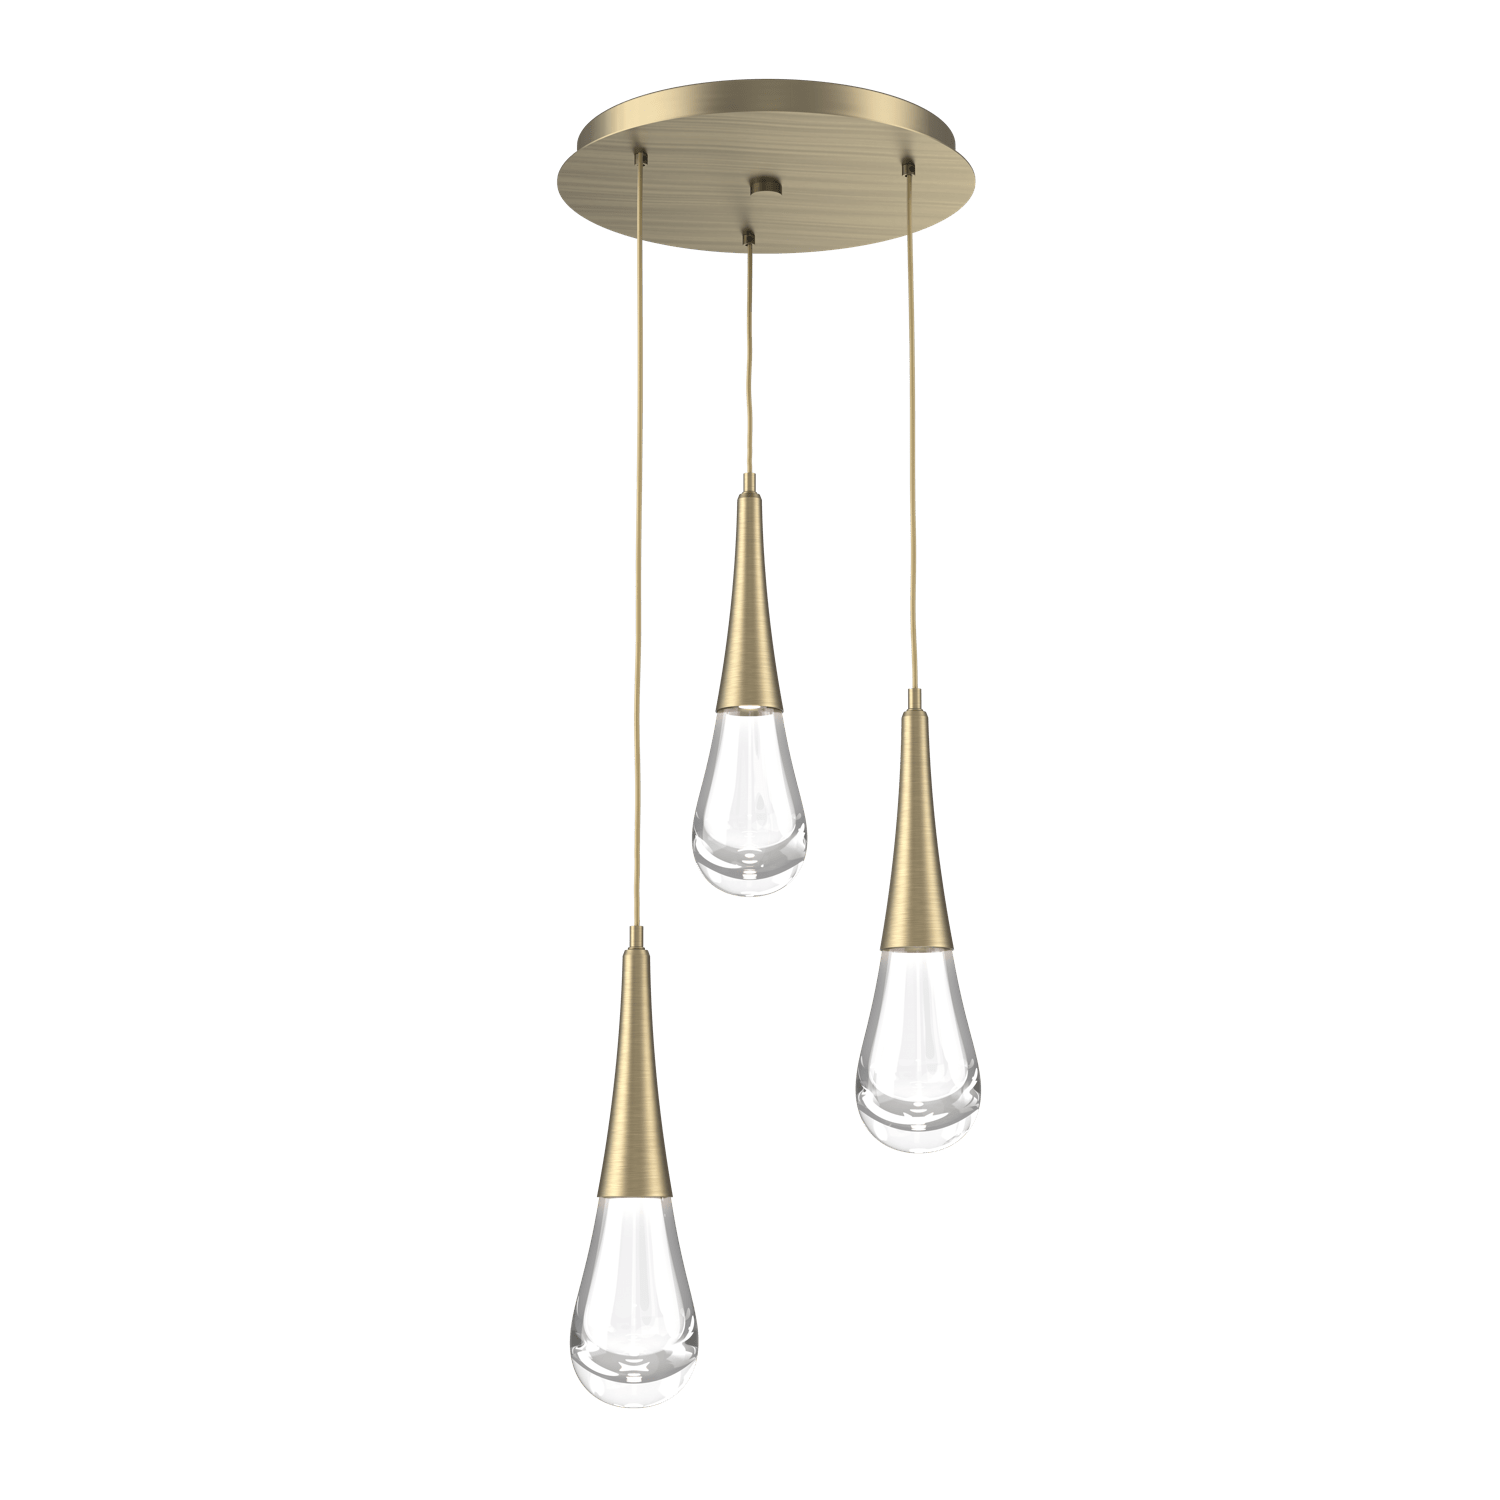 CHB0078-03-HB-Hammerton-Studio-Raindrop-3-light-round-pendant-chandelier-with-heritage-brass-finish-and-clear-blown-glass-shades-and-LED-lamping